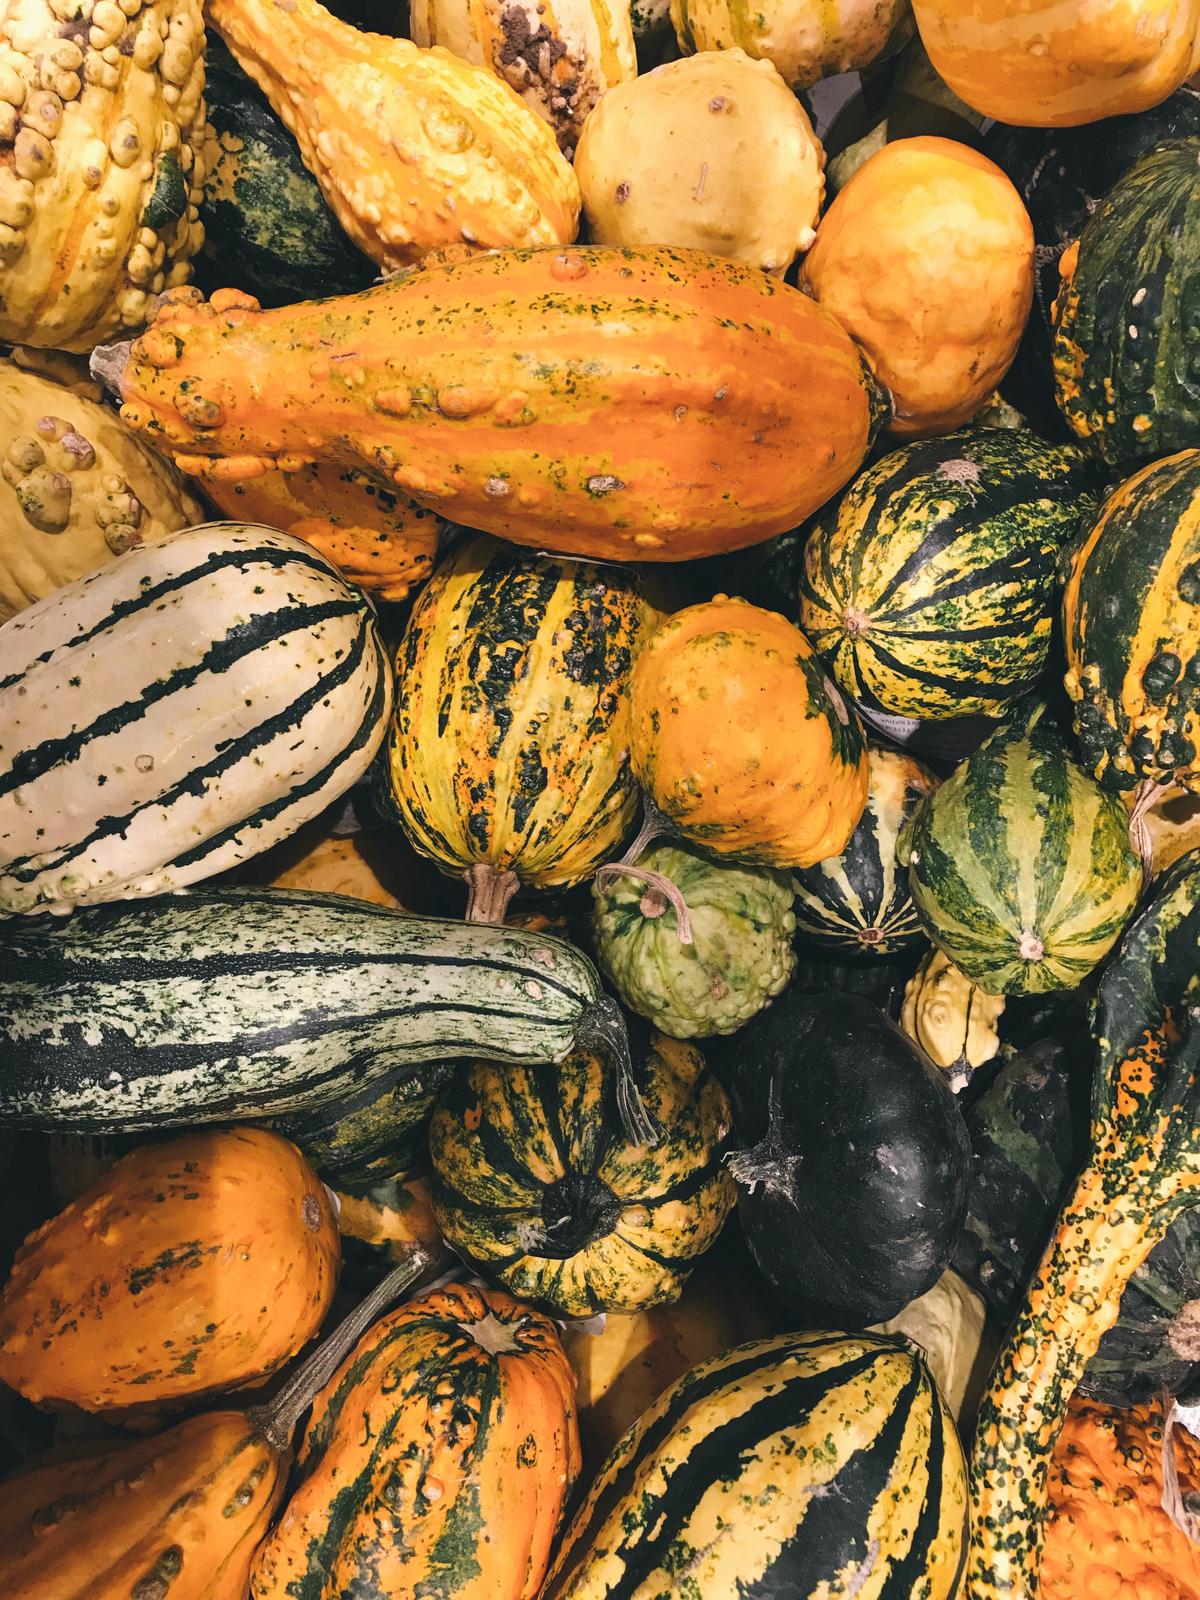 Assortment of colorful squash representing the various squash varieties discussed in the text